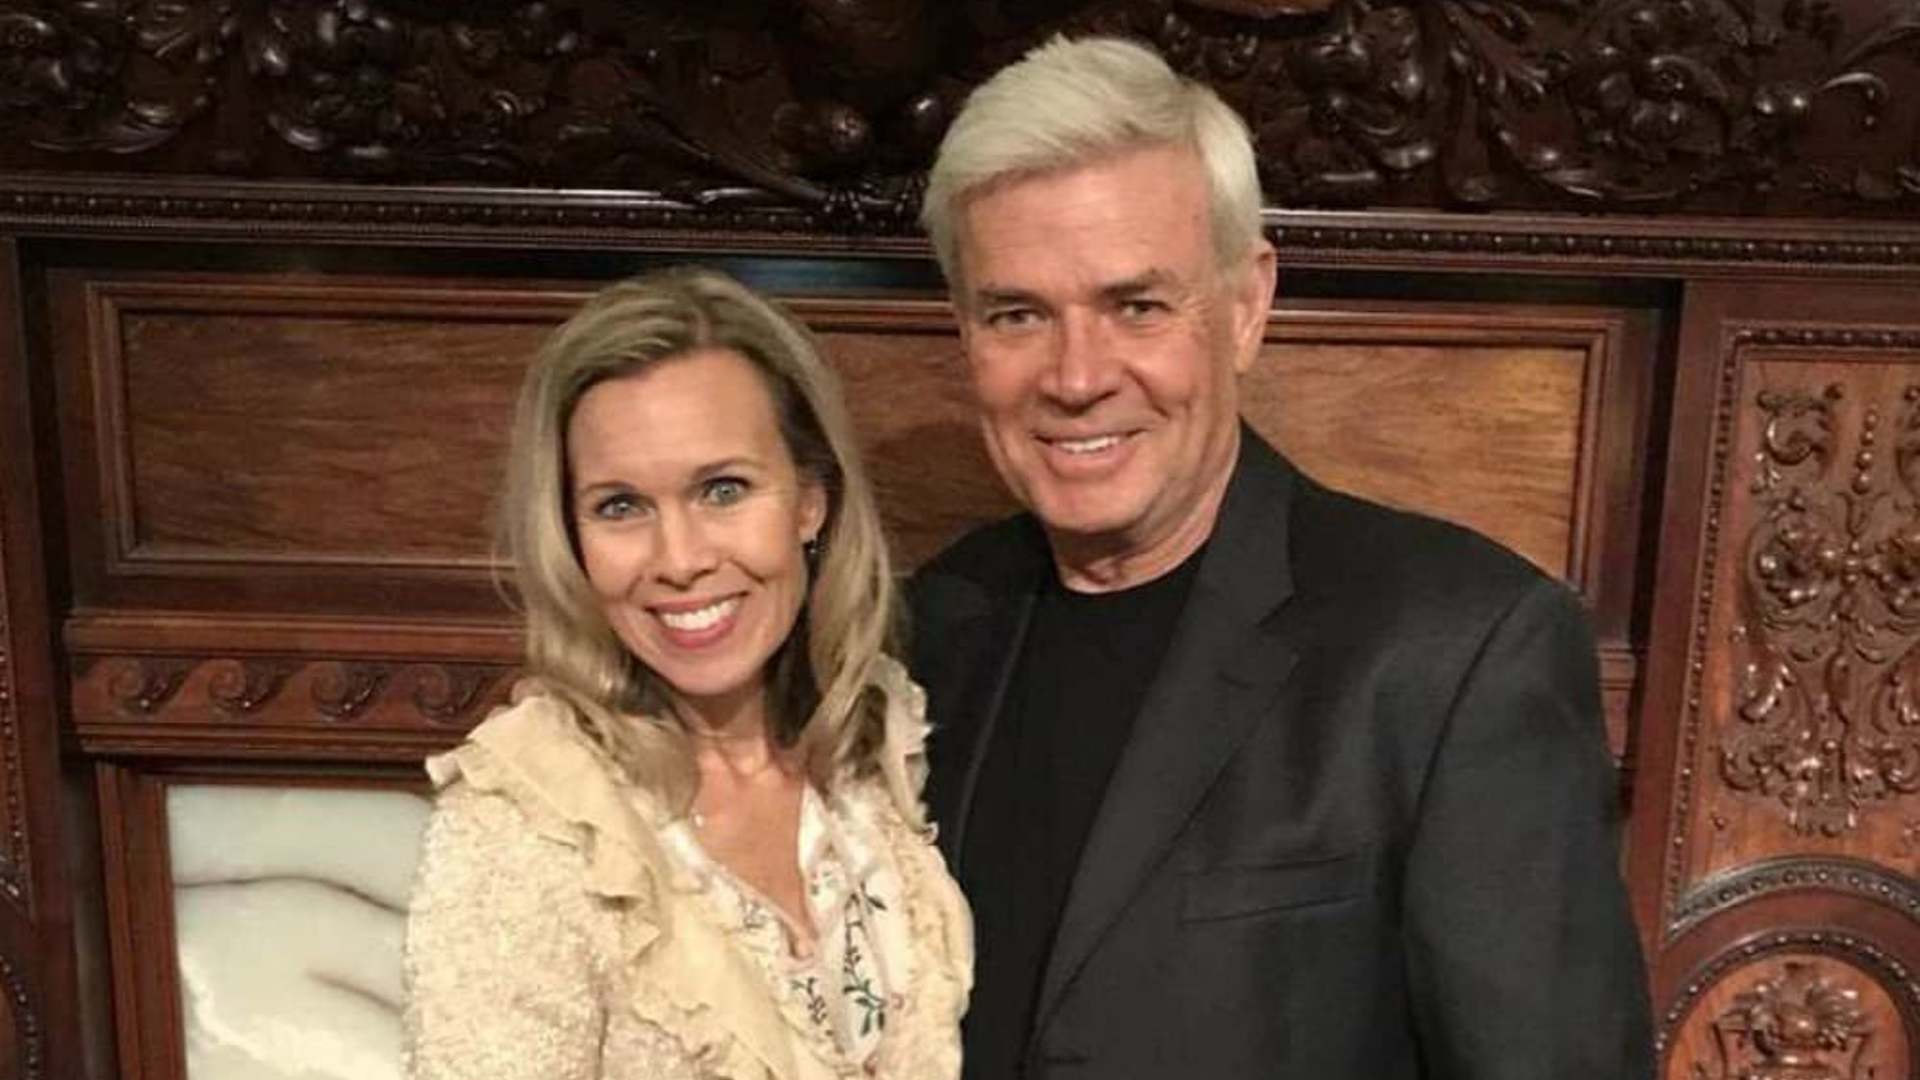 Who is Eric Bischoff's wife? Know all about Loree Bischoff